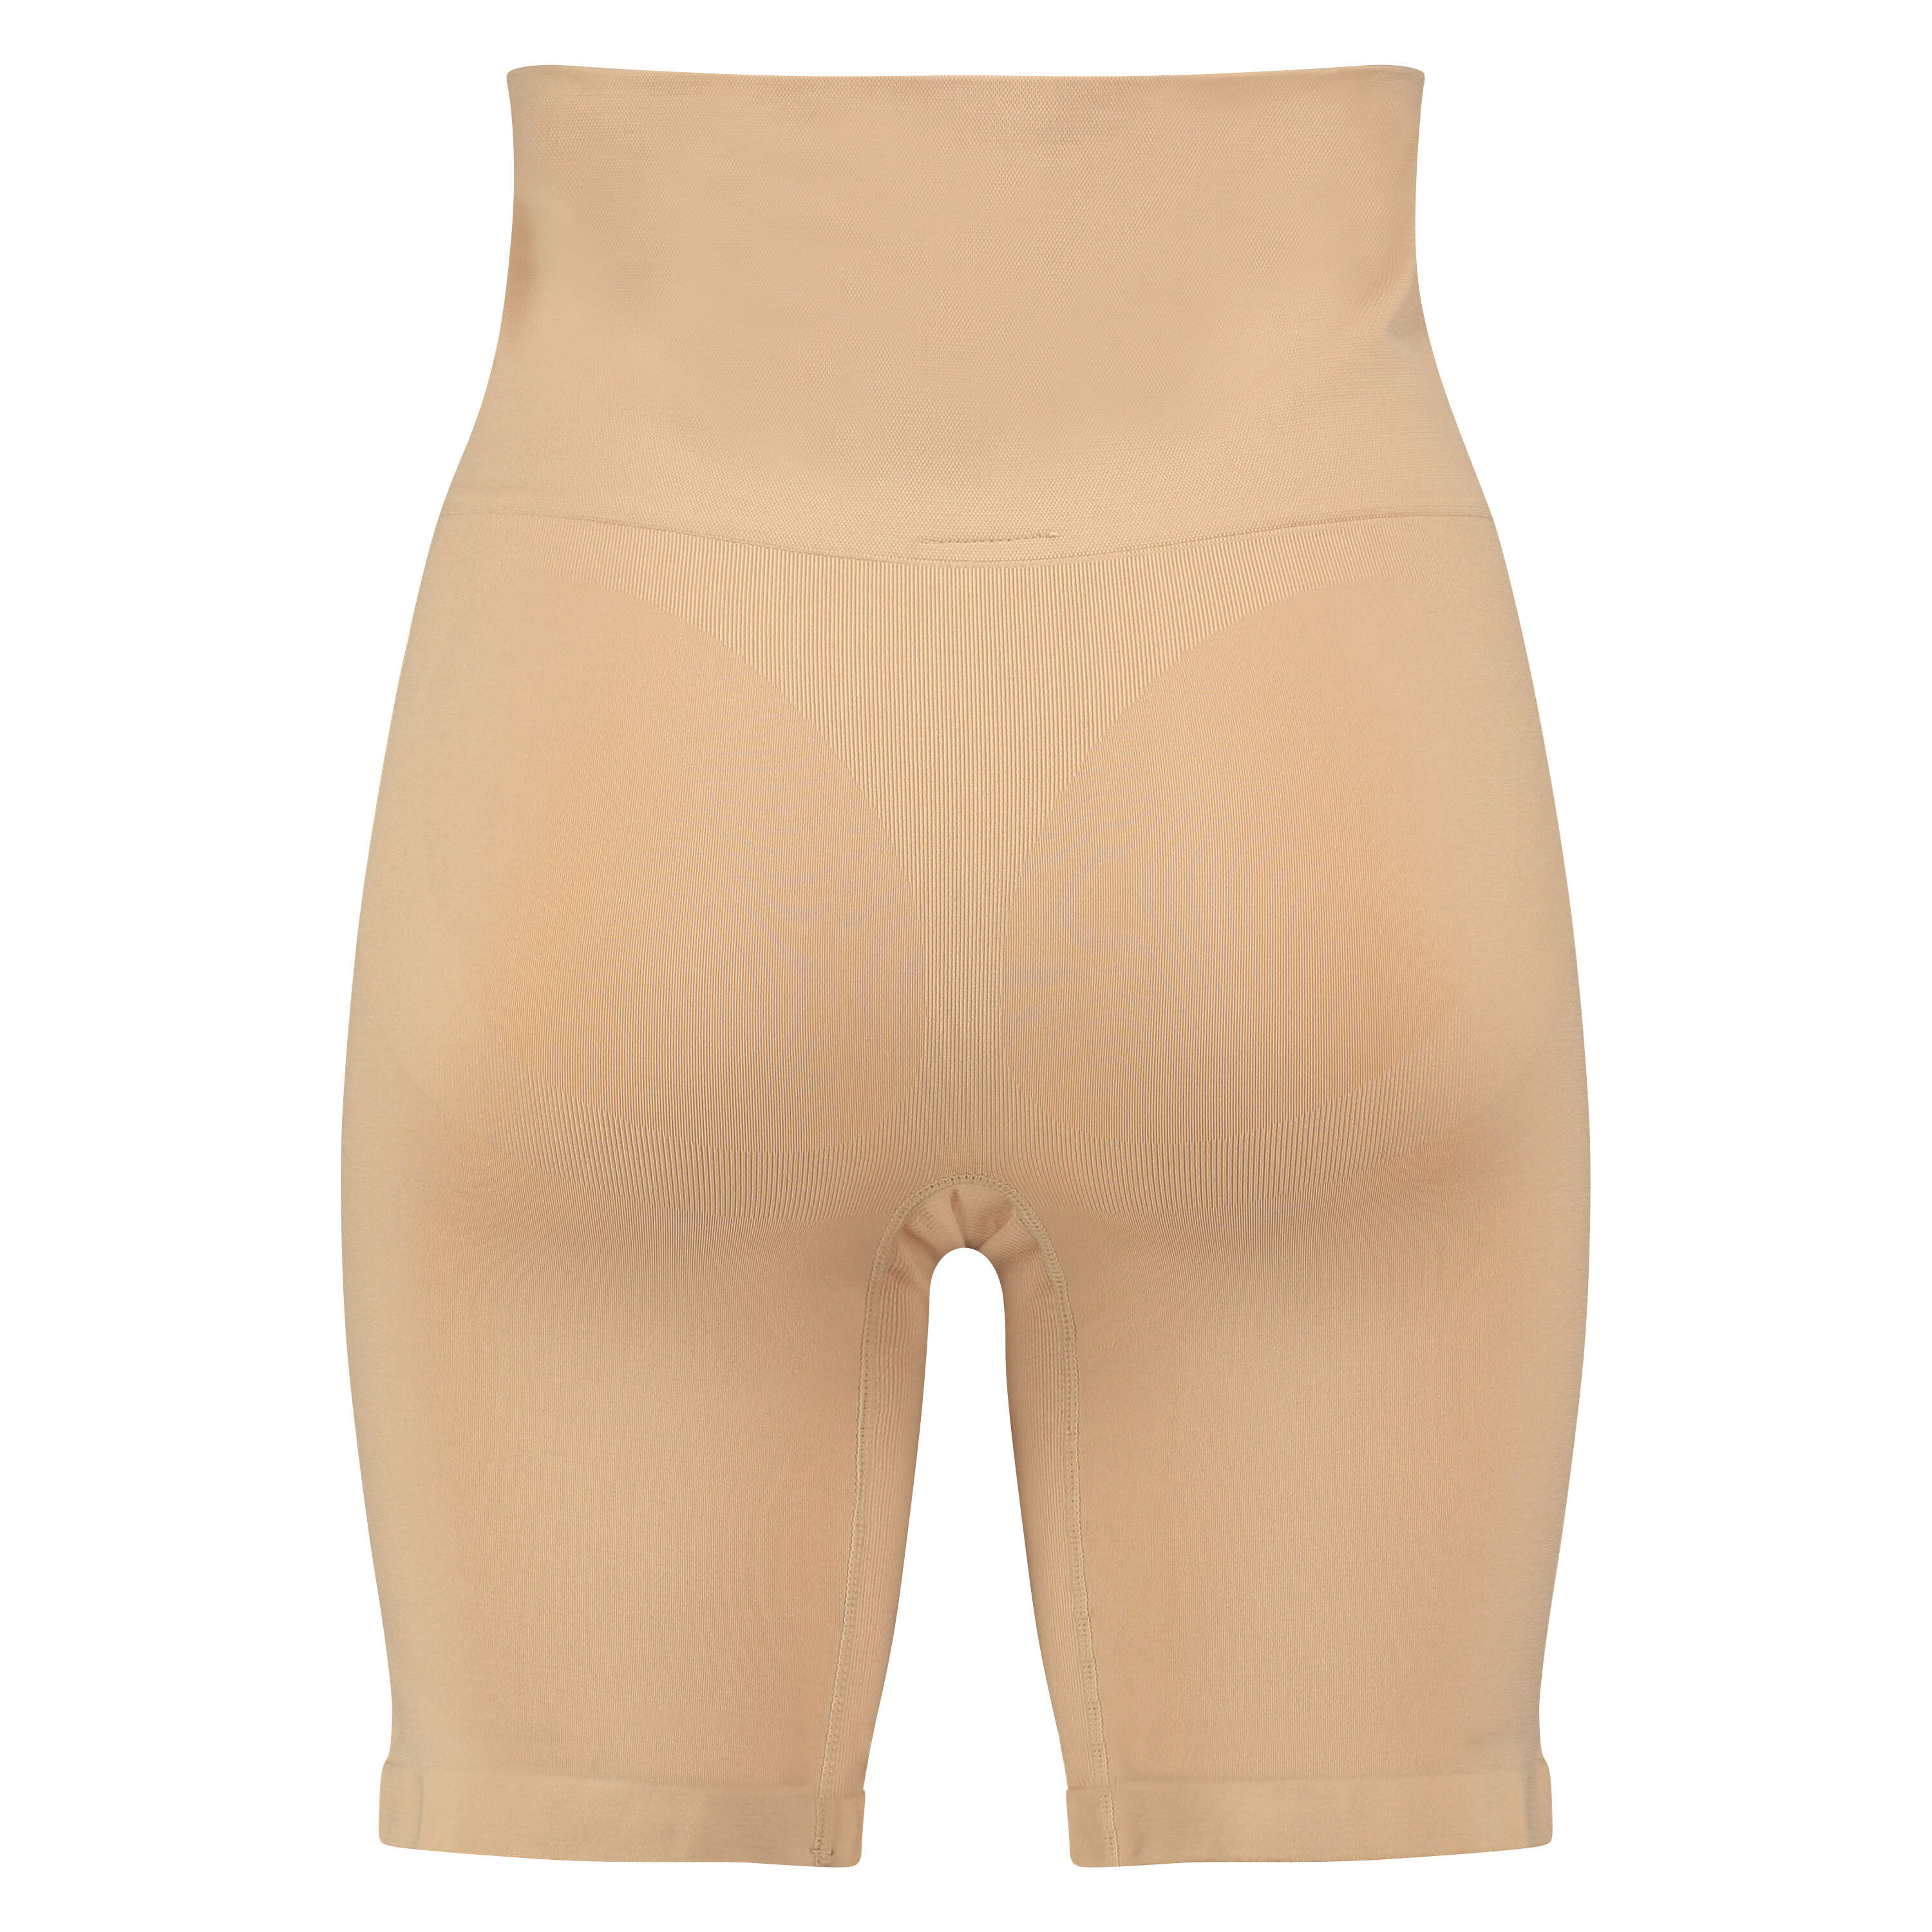 Firming high trousers - Level 2, Beige, main